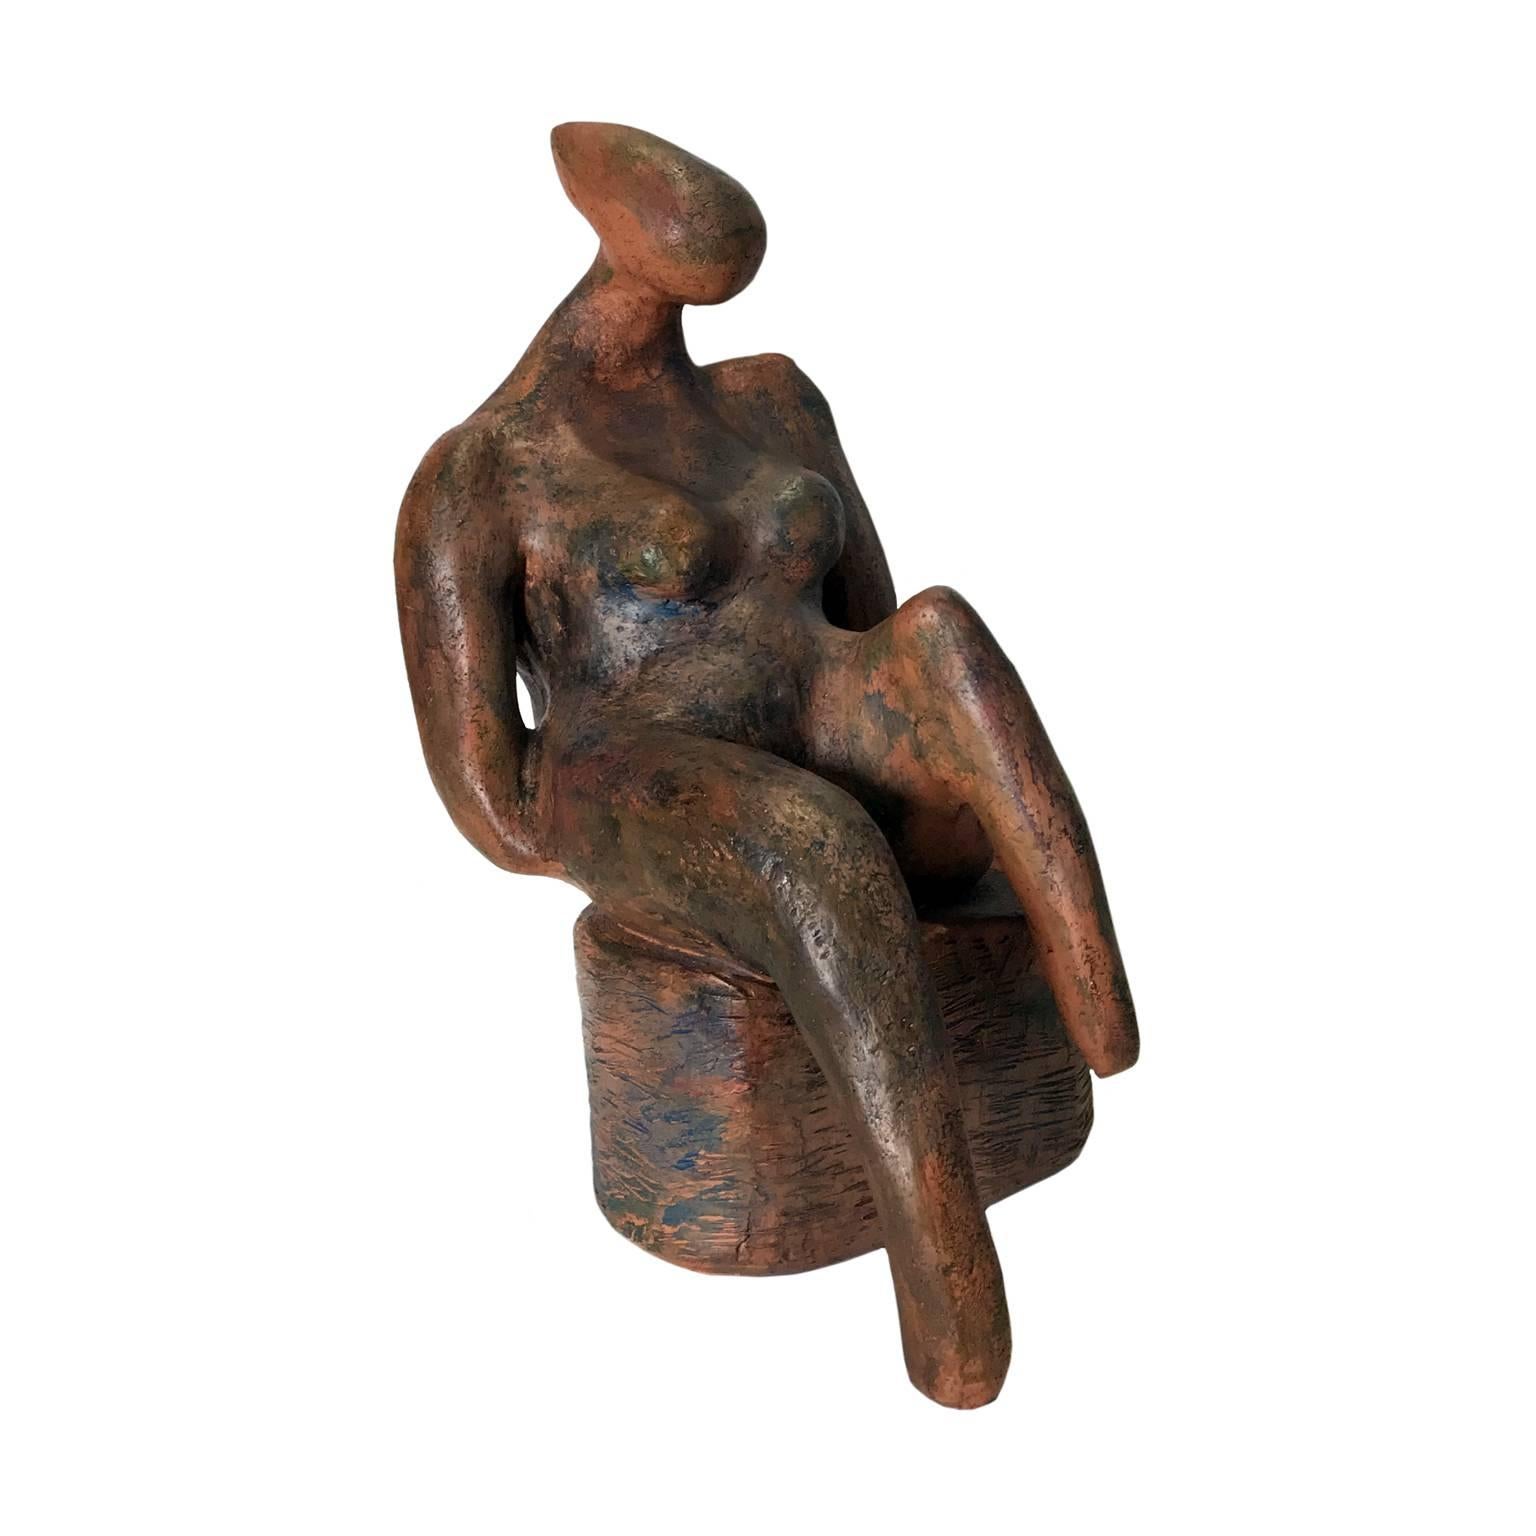 Figurative nude seated female terracotta sculpture. Signed illegibly and dated 1995.